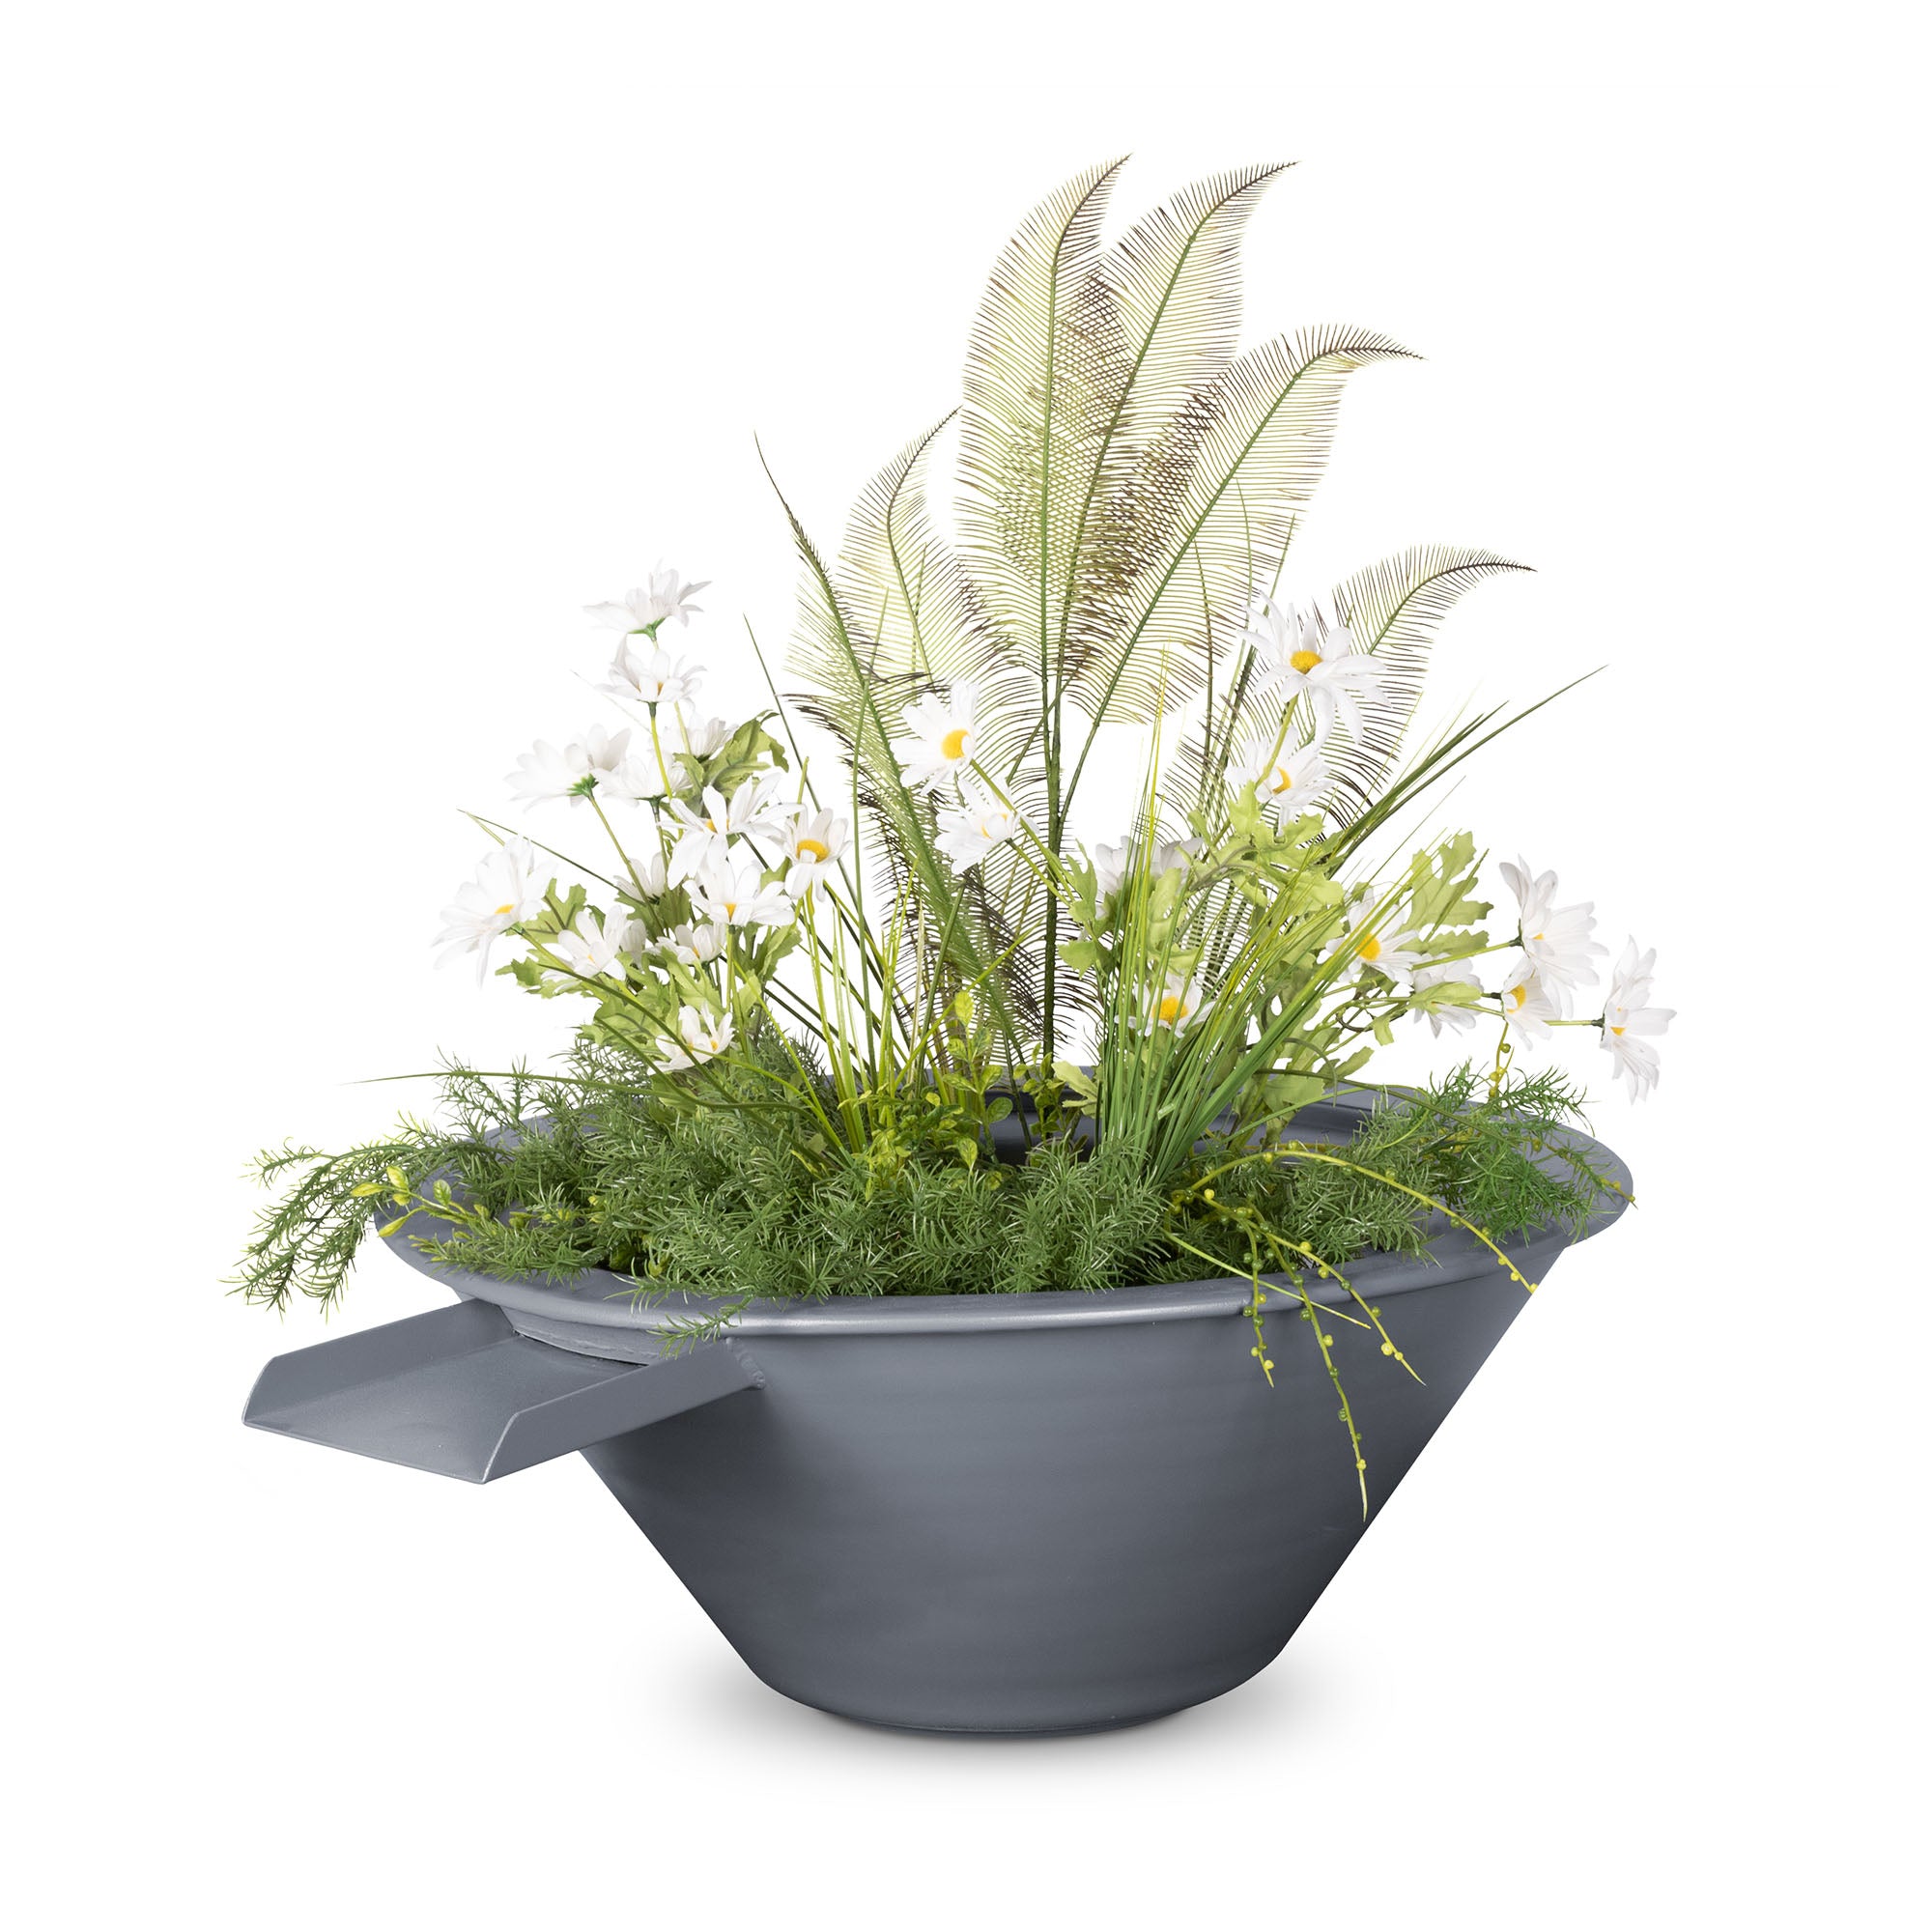 The Outdoor Plus Cazo Planter & Water Bowl Powder Coated Metal OPT-RXXPCPW - Serenity Provision